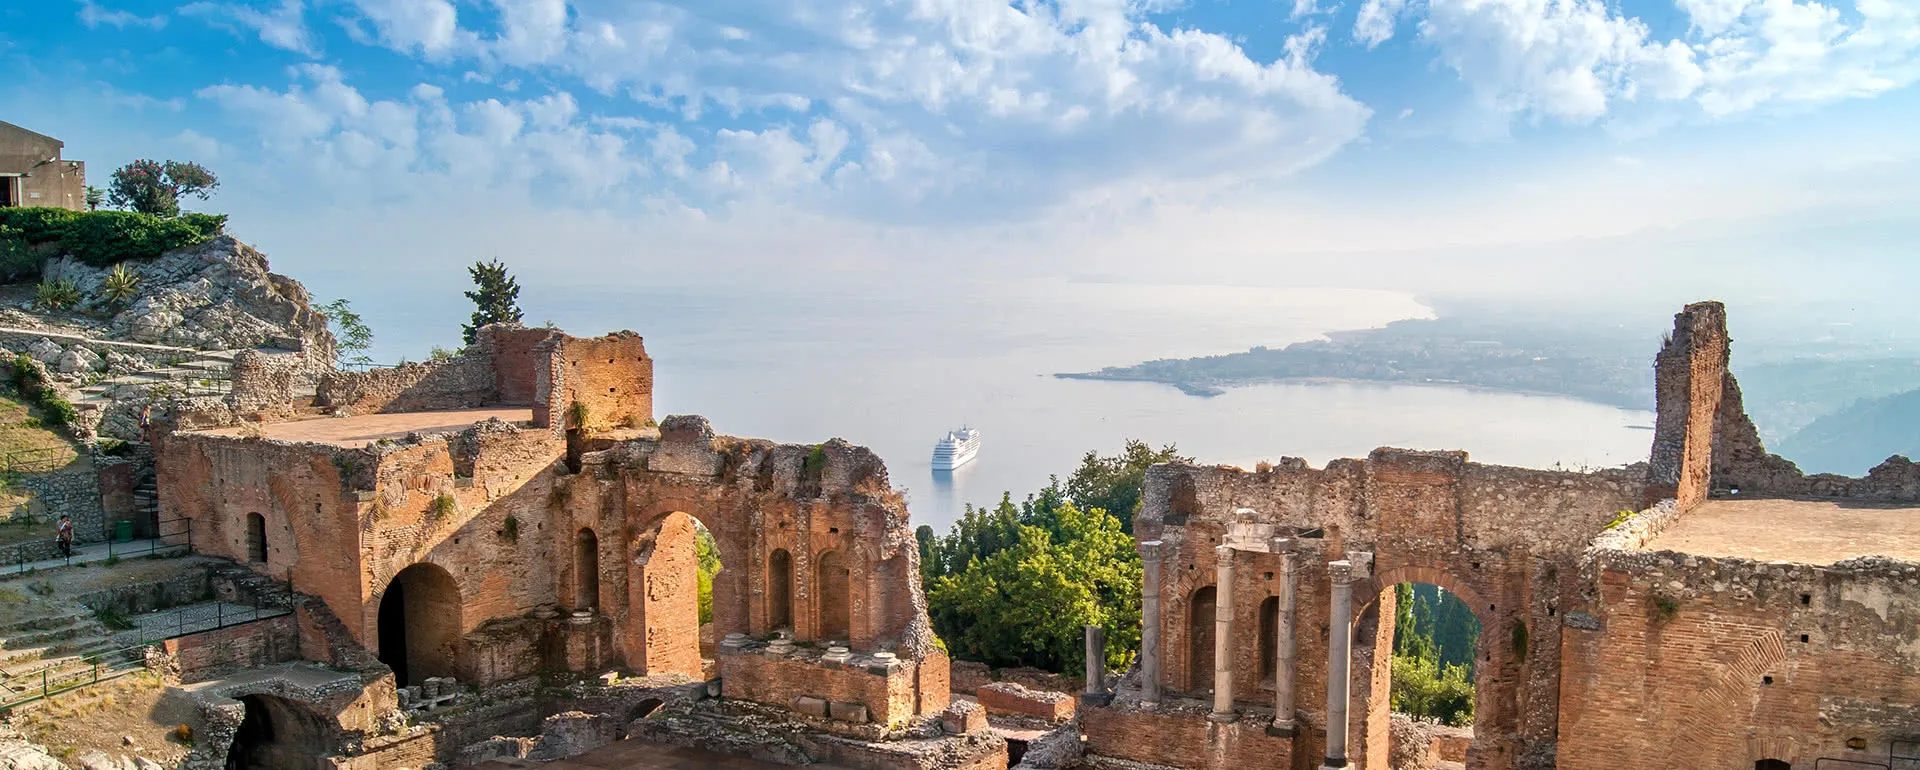 Meeting and conference location Taormina